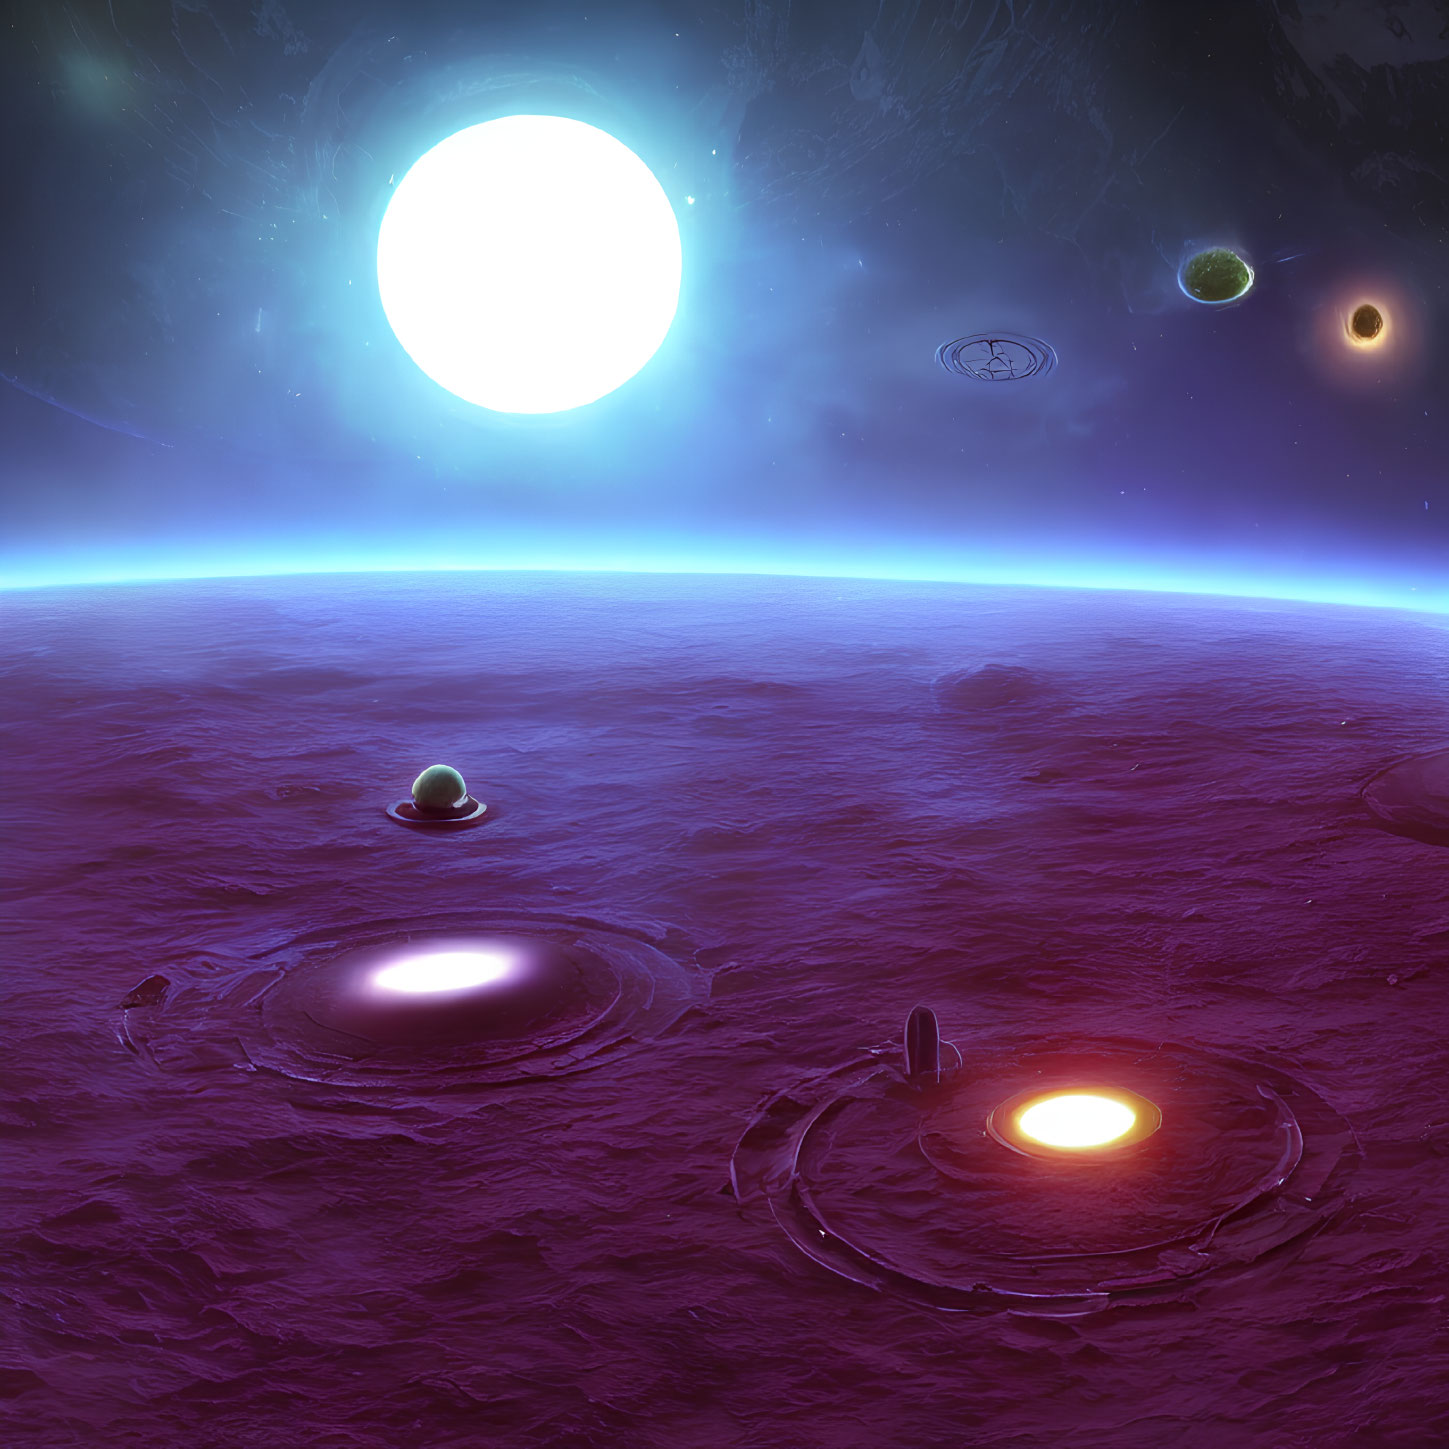 Purple Alien Planet Landscape with Glowing Craters and Moons